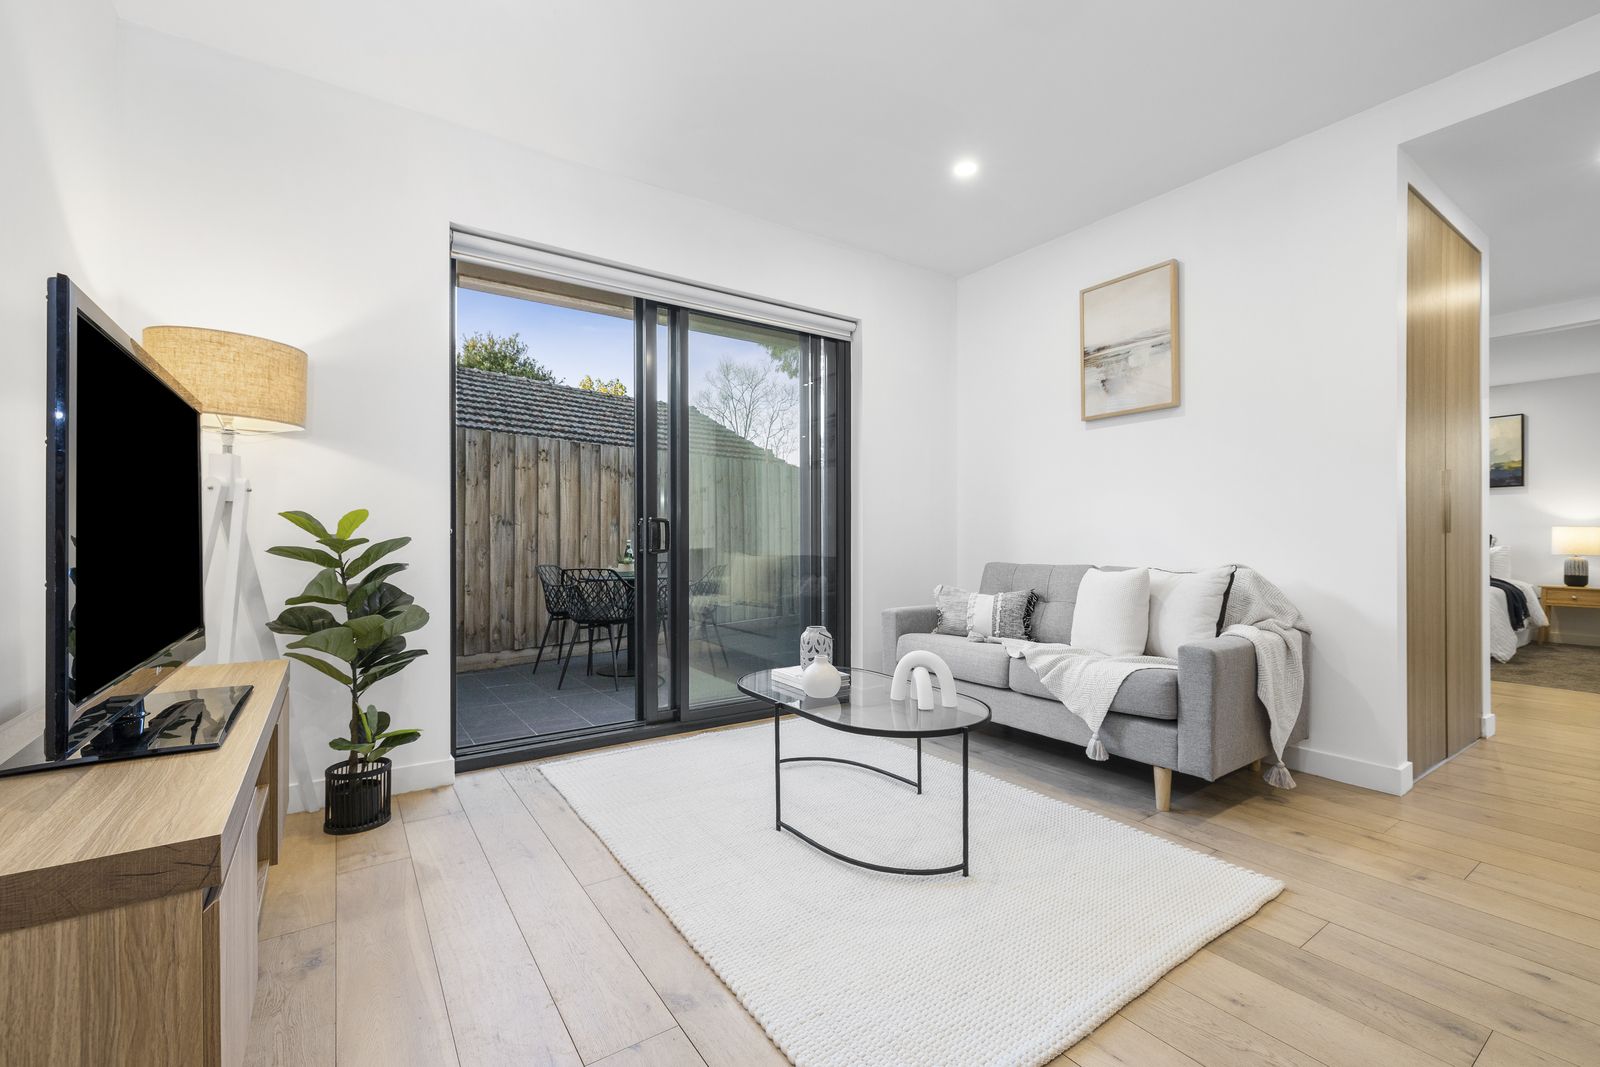 2 bedrooms Apartment / Unit / Flat in 4/5A Winton Road MALVERN EAST VIC, 3145